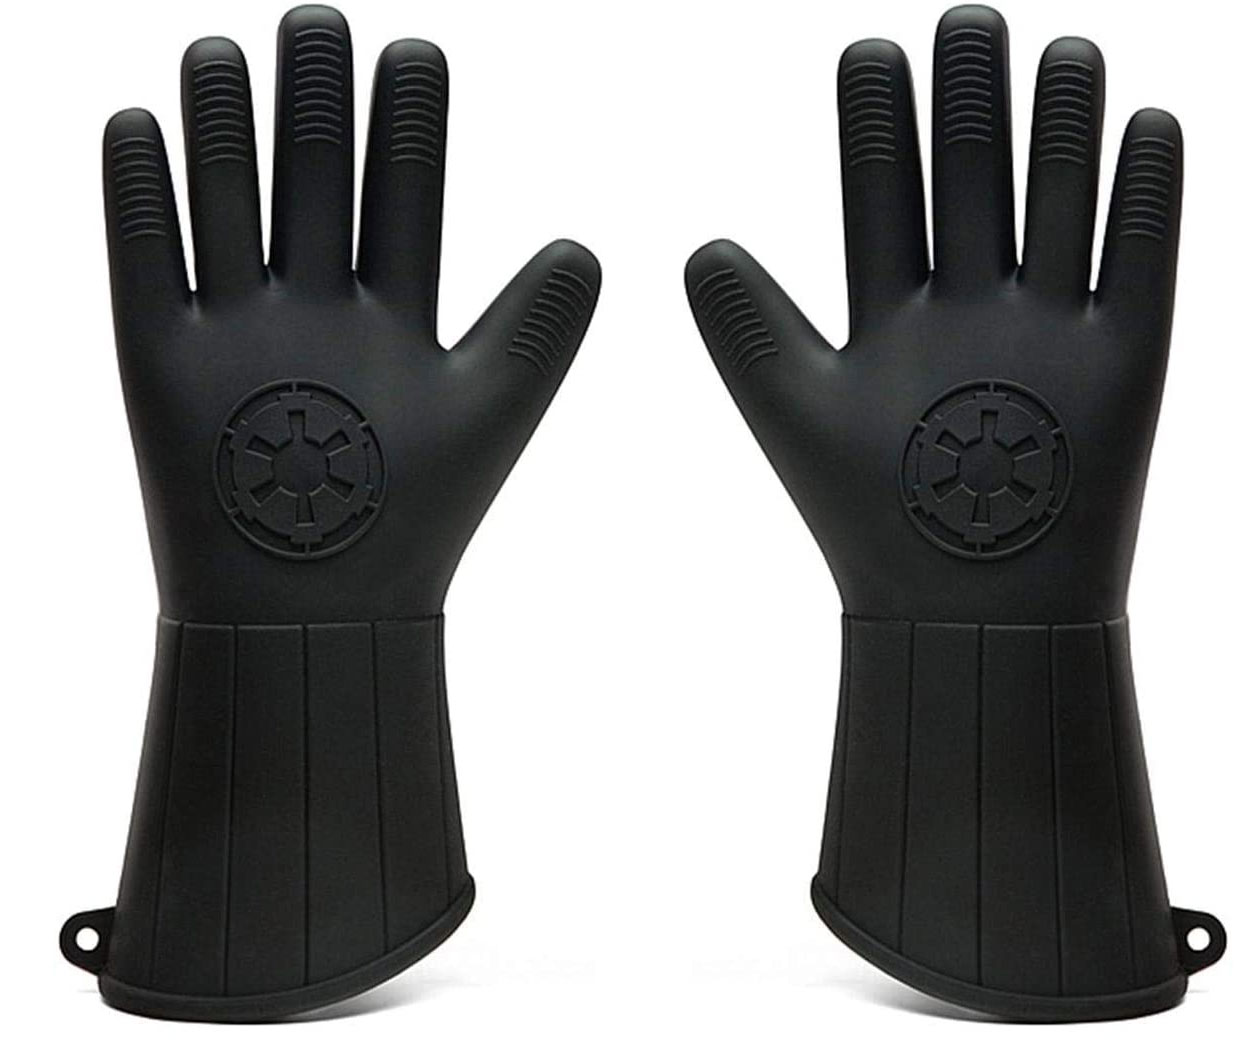 Darth Vader Oven Mitts